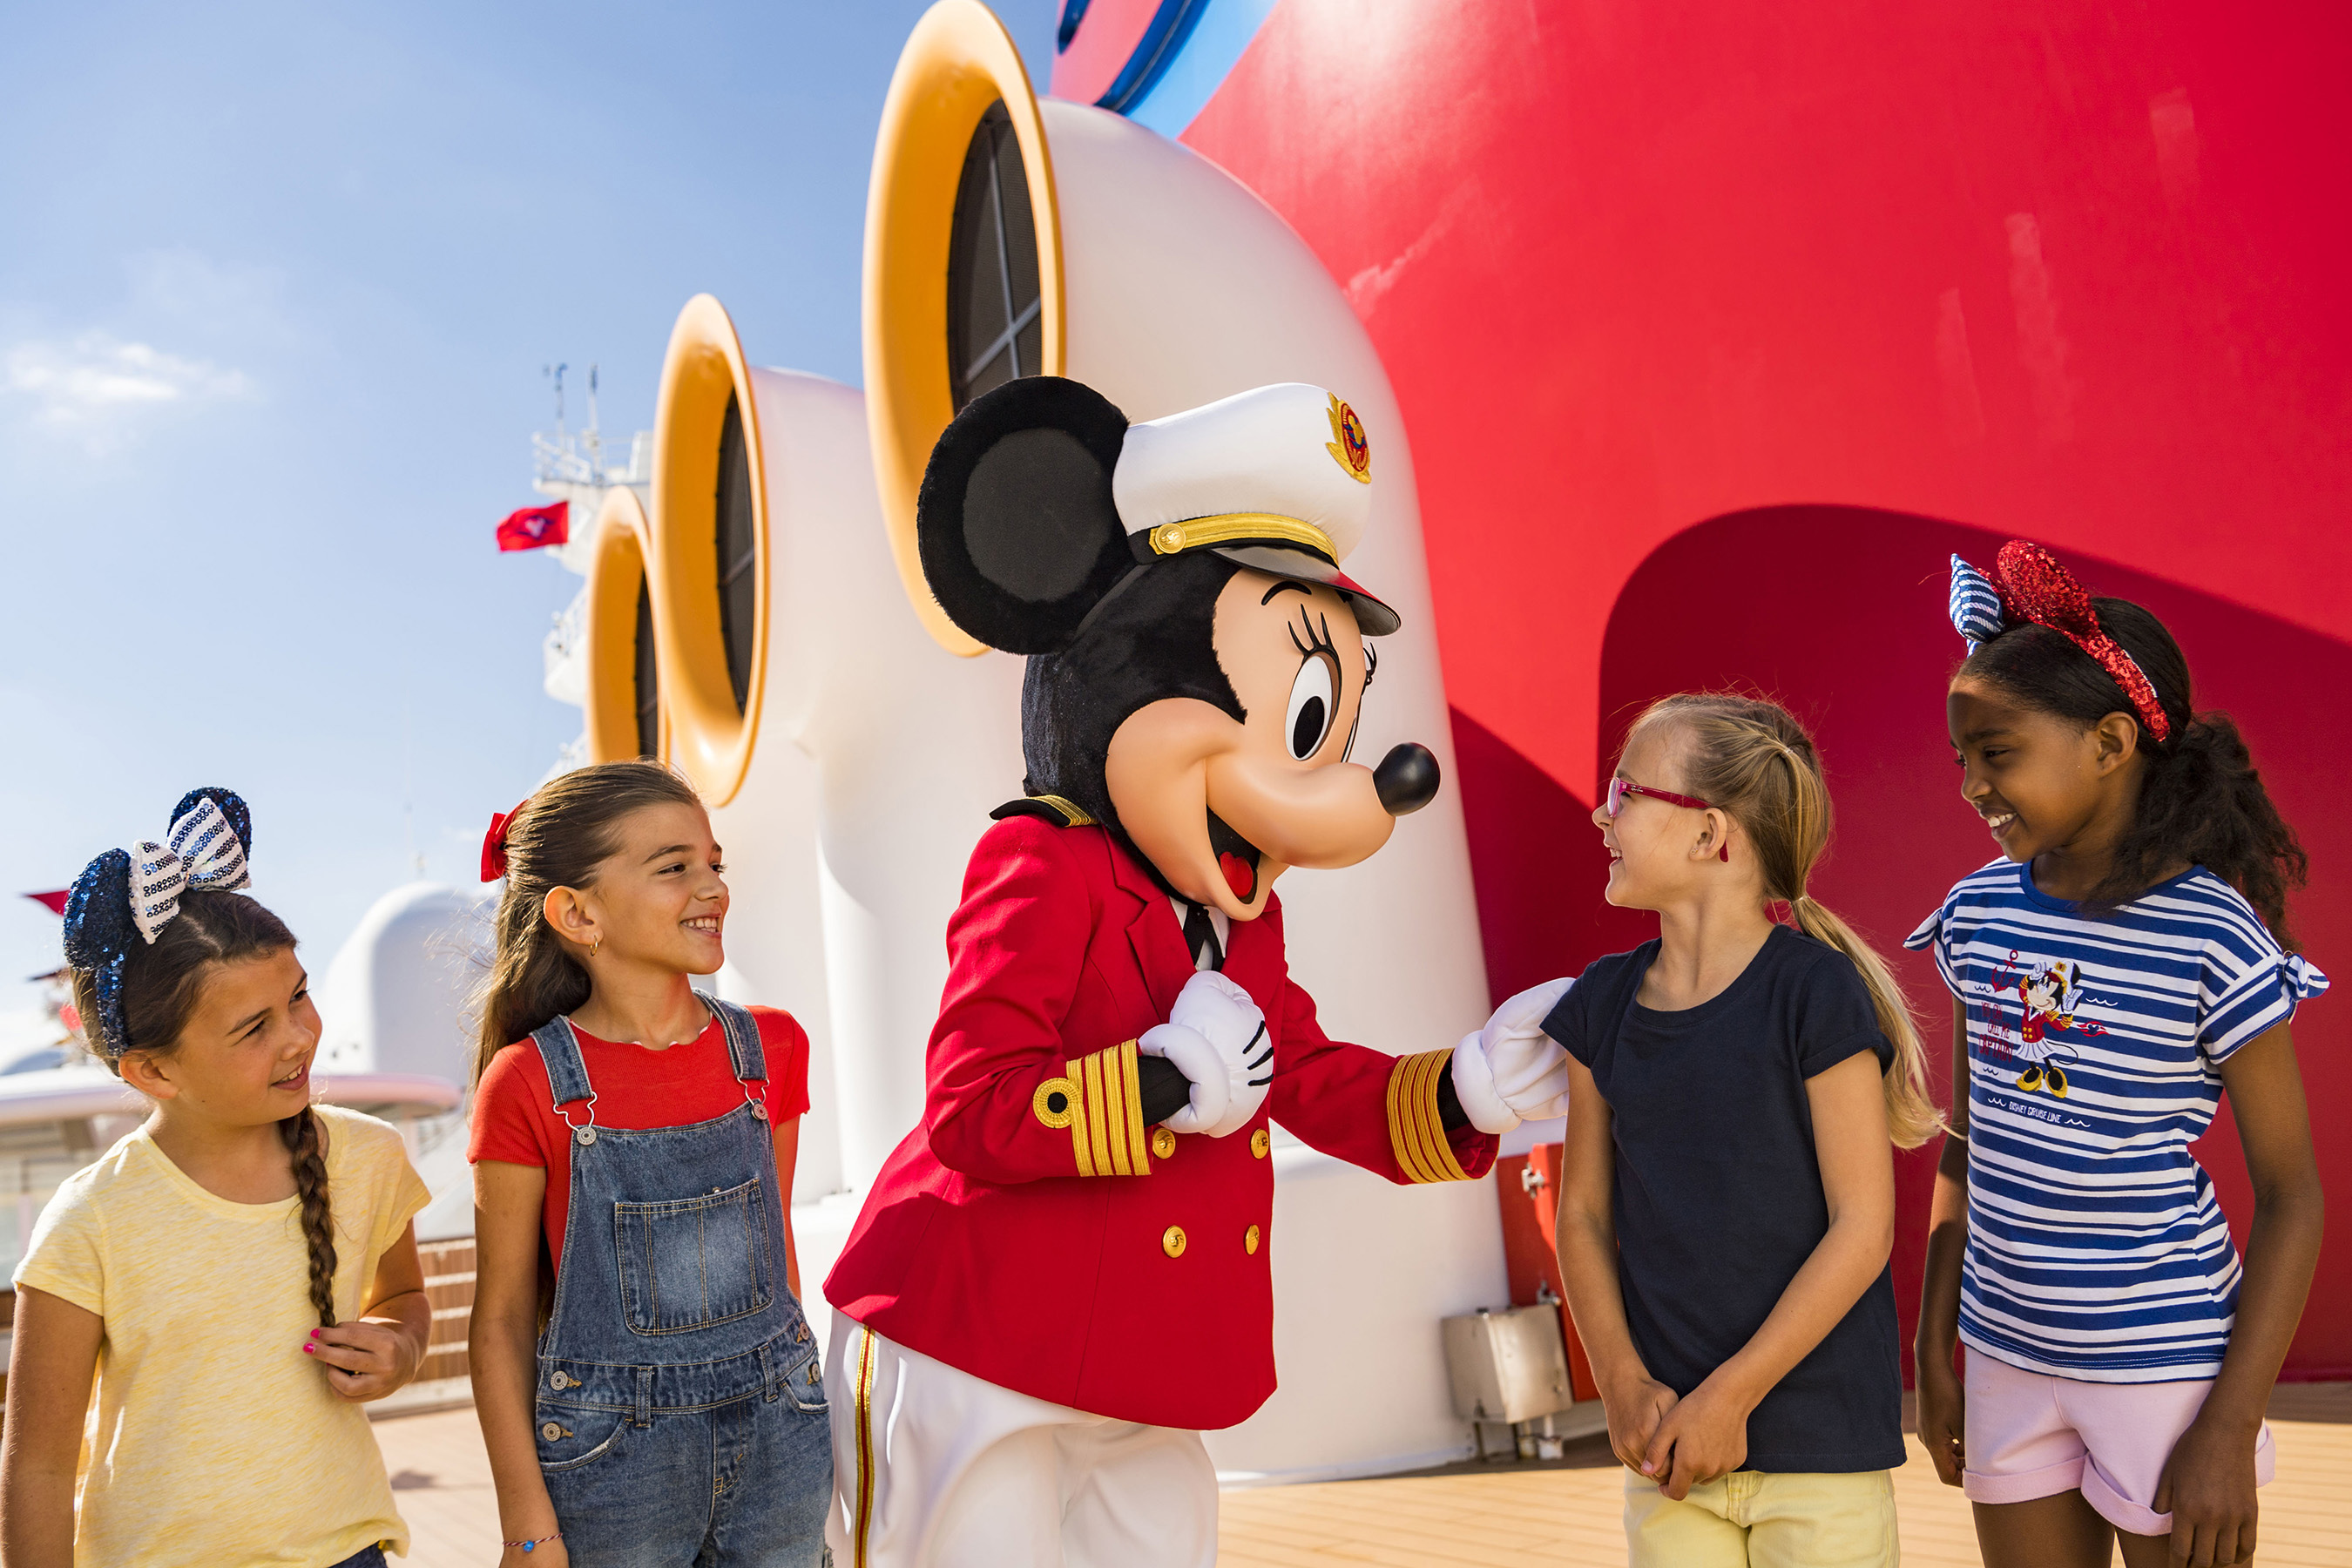 Captain Minnie Mouse is delighting children aboard all Disney Cruise Line ships, spreading the message of exploring new horizons as part of a collection of new initiatives aiming to inspire the next generation of female leaders in the maritime industry. The debut of Captain Minnie Mouse, plus new youth programs and the funding of scholarships, are designed to empower girls and young women to pursue careers in the cruise industry and chart a course for success. (Matt Stroshane, photographer)